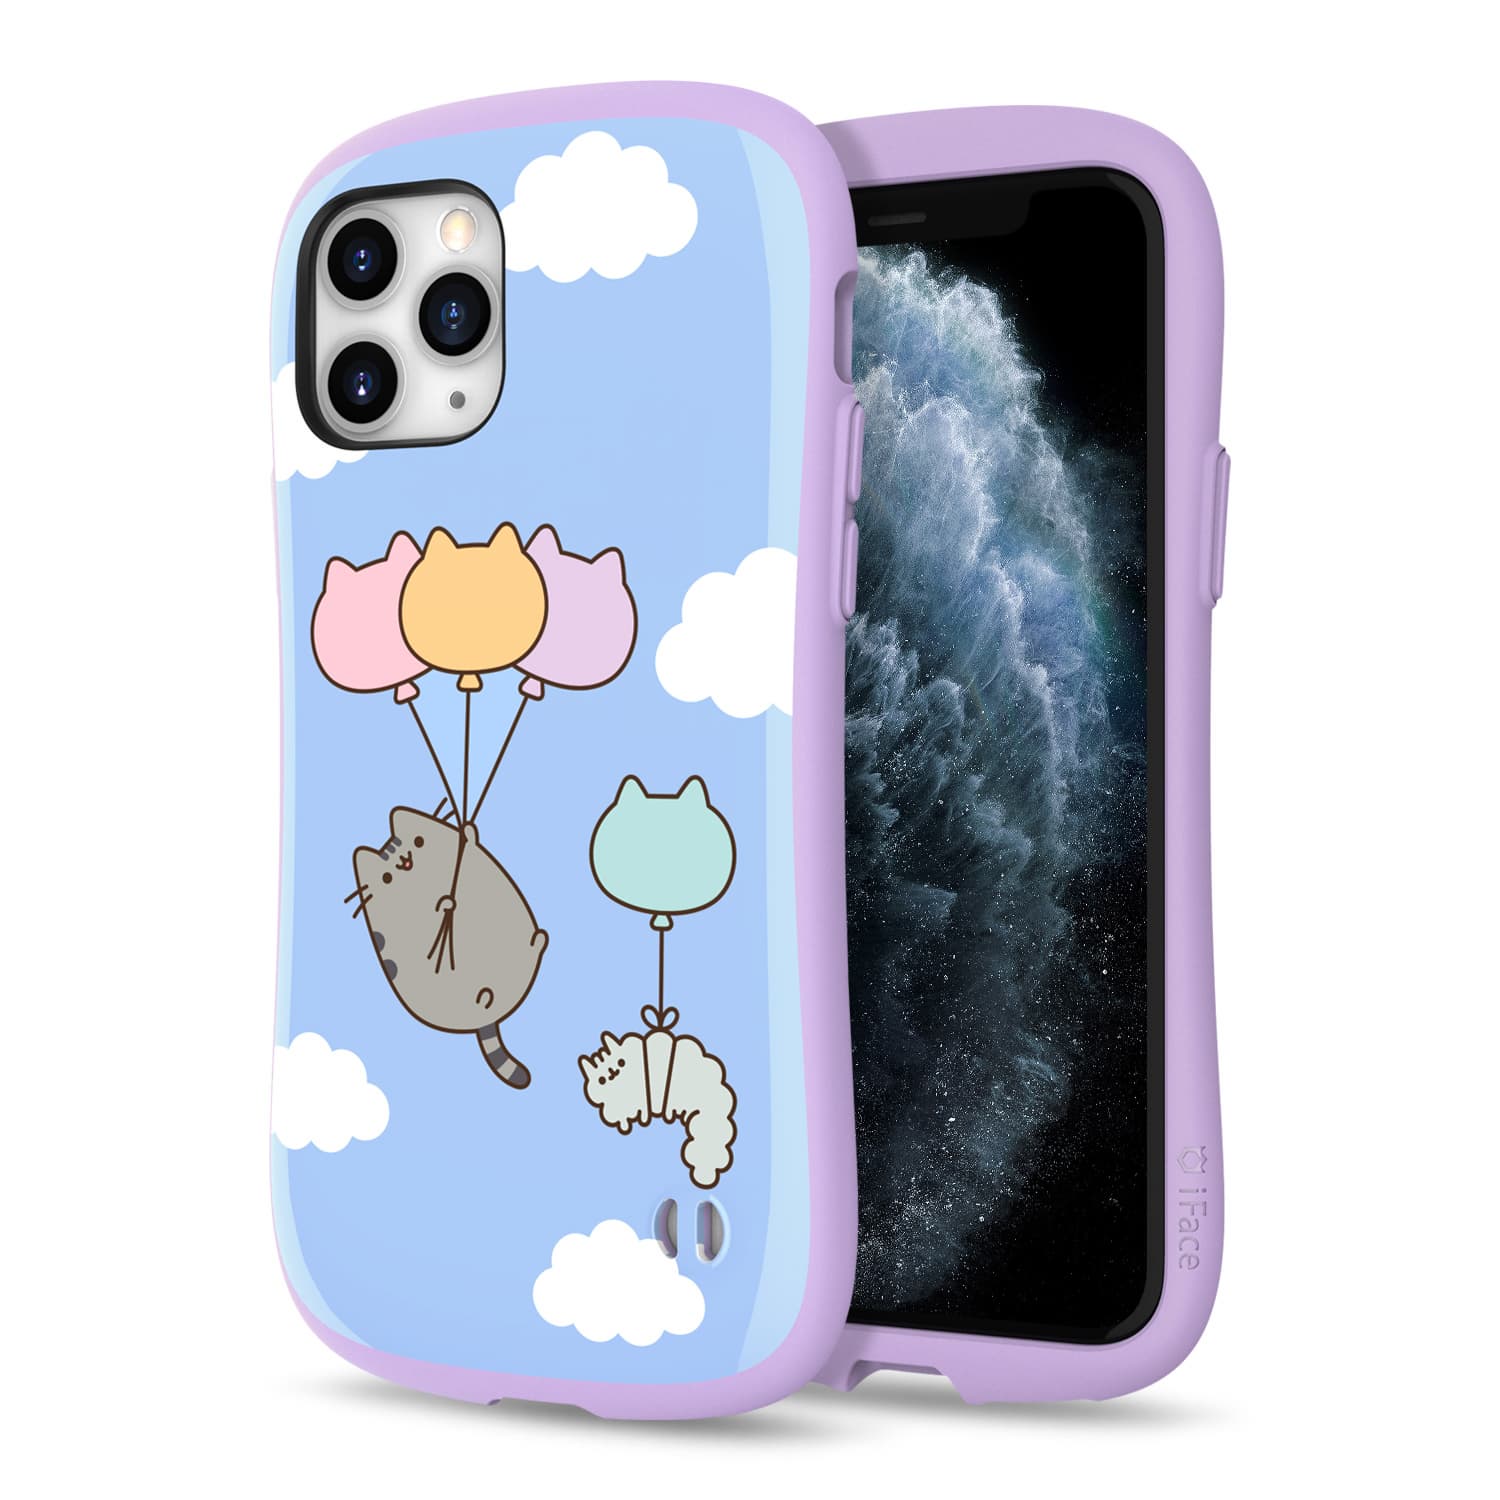 iFace_Pusheen Character Case _ Mobile Phone Case